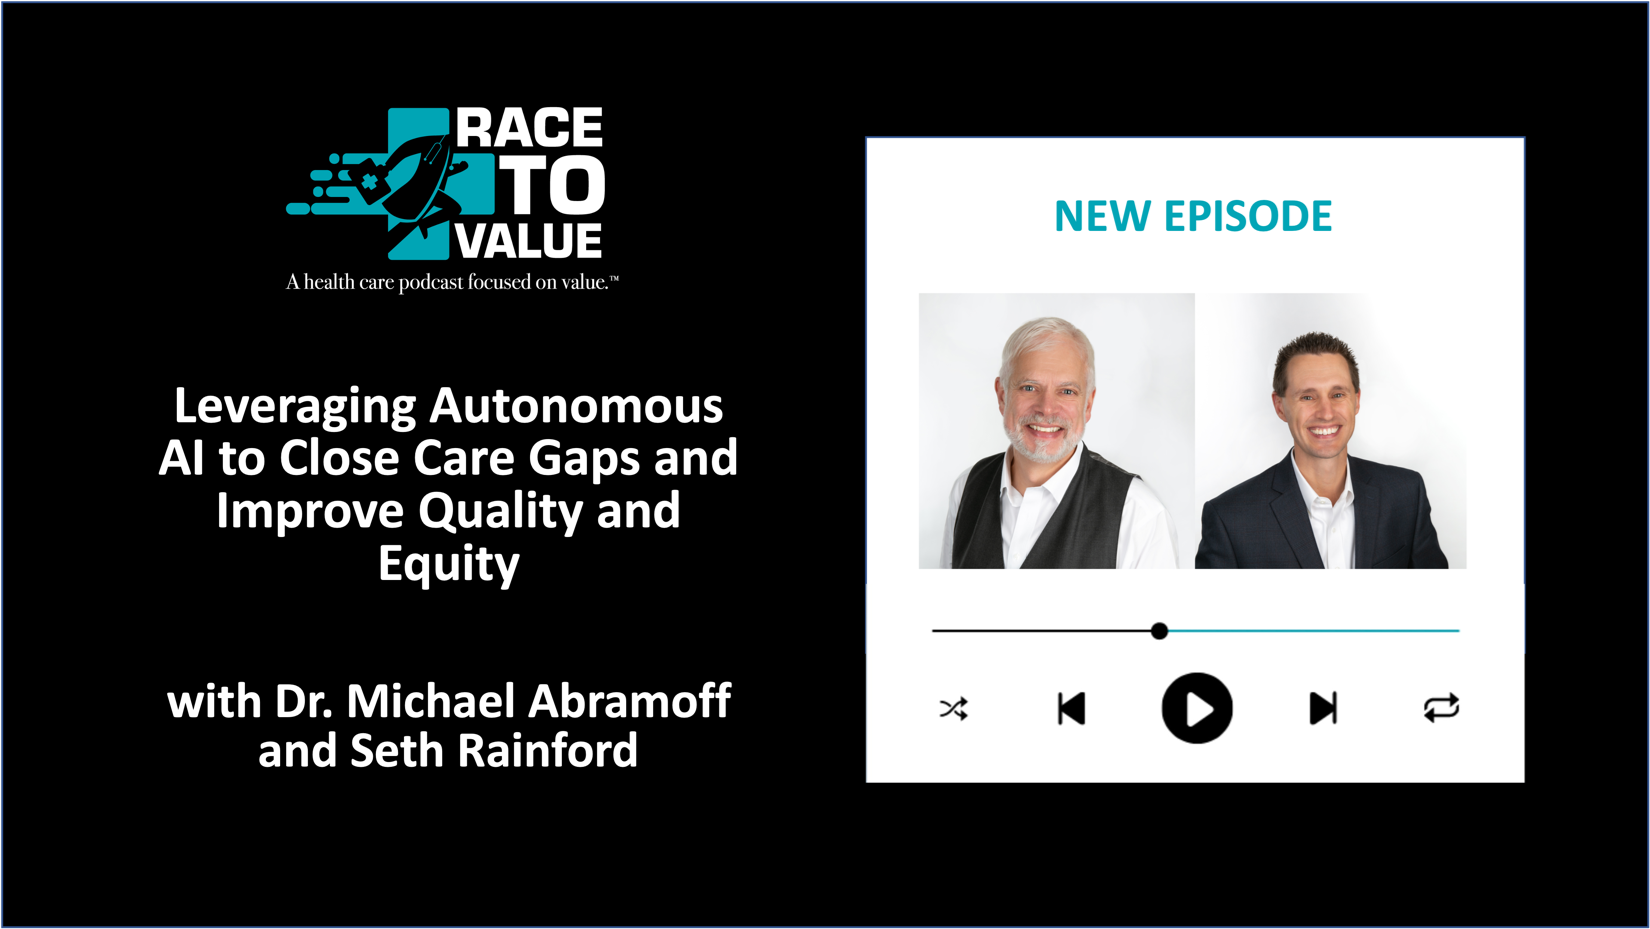 Race to Value – Leveraging Autonomous AI to Close Care Gaps and Improve Quality and Equity